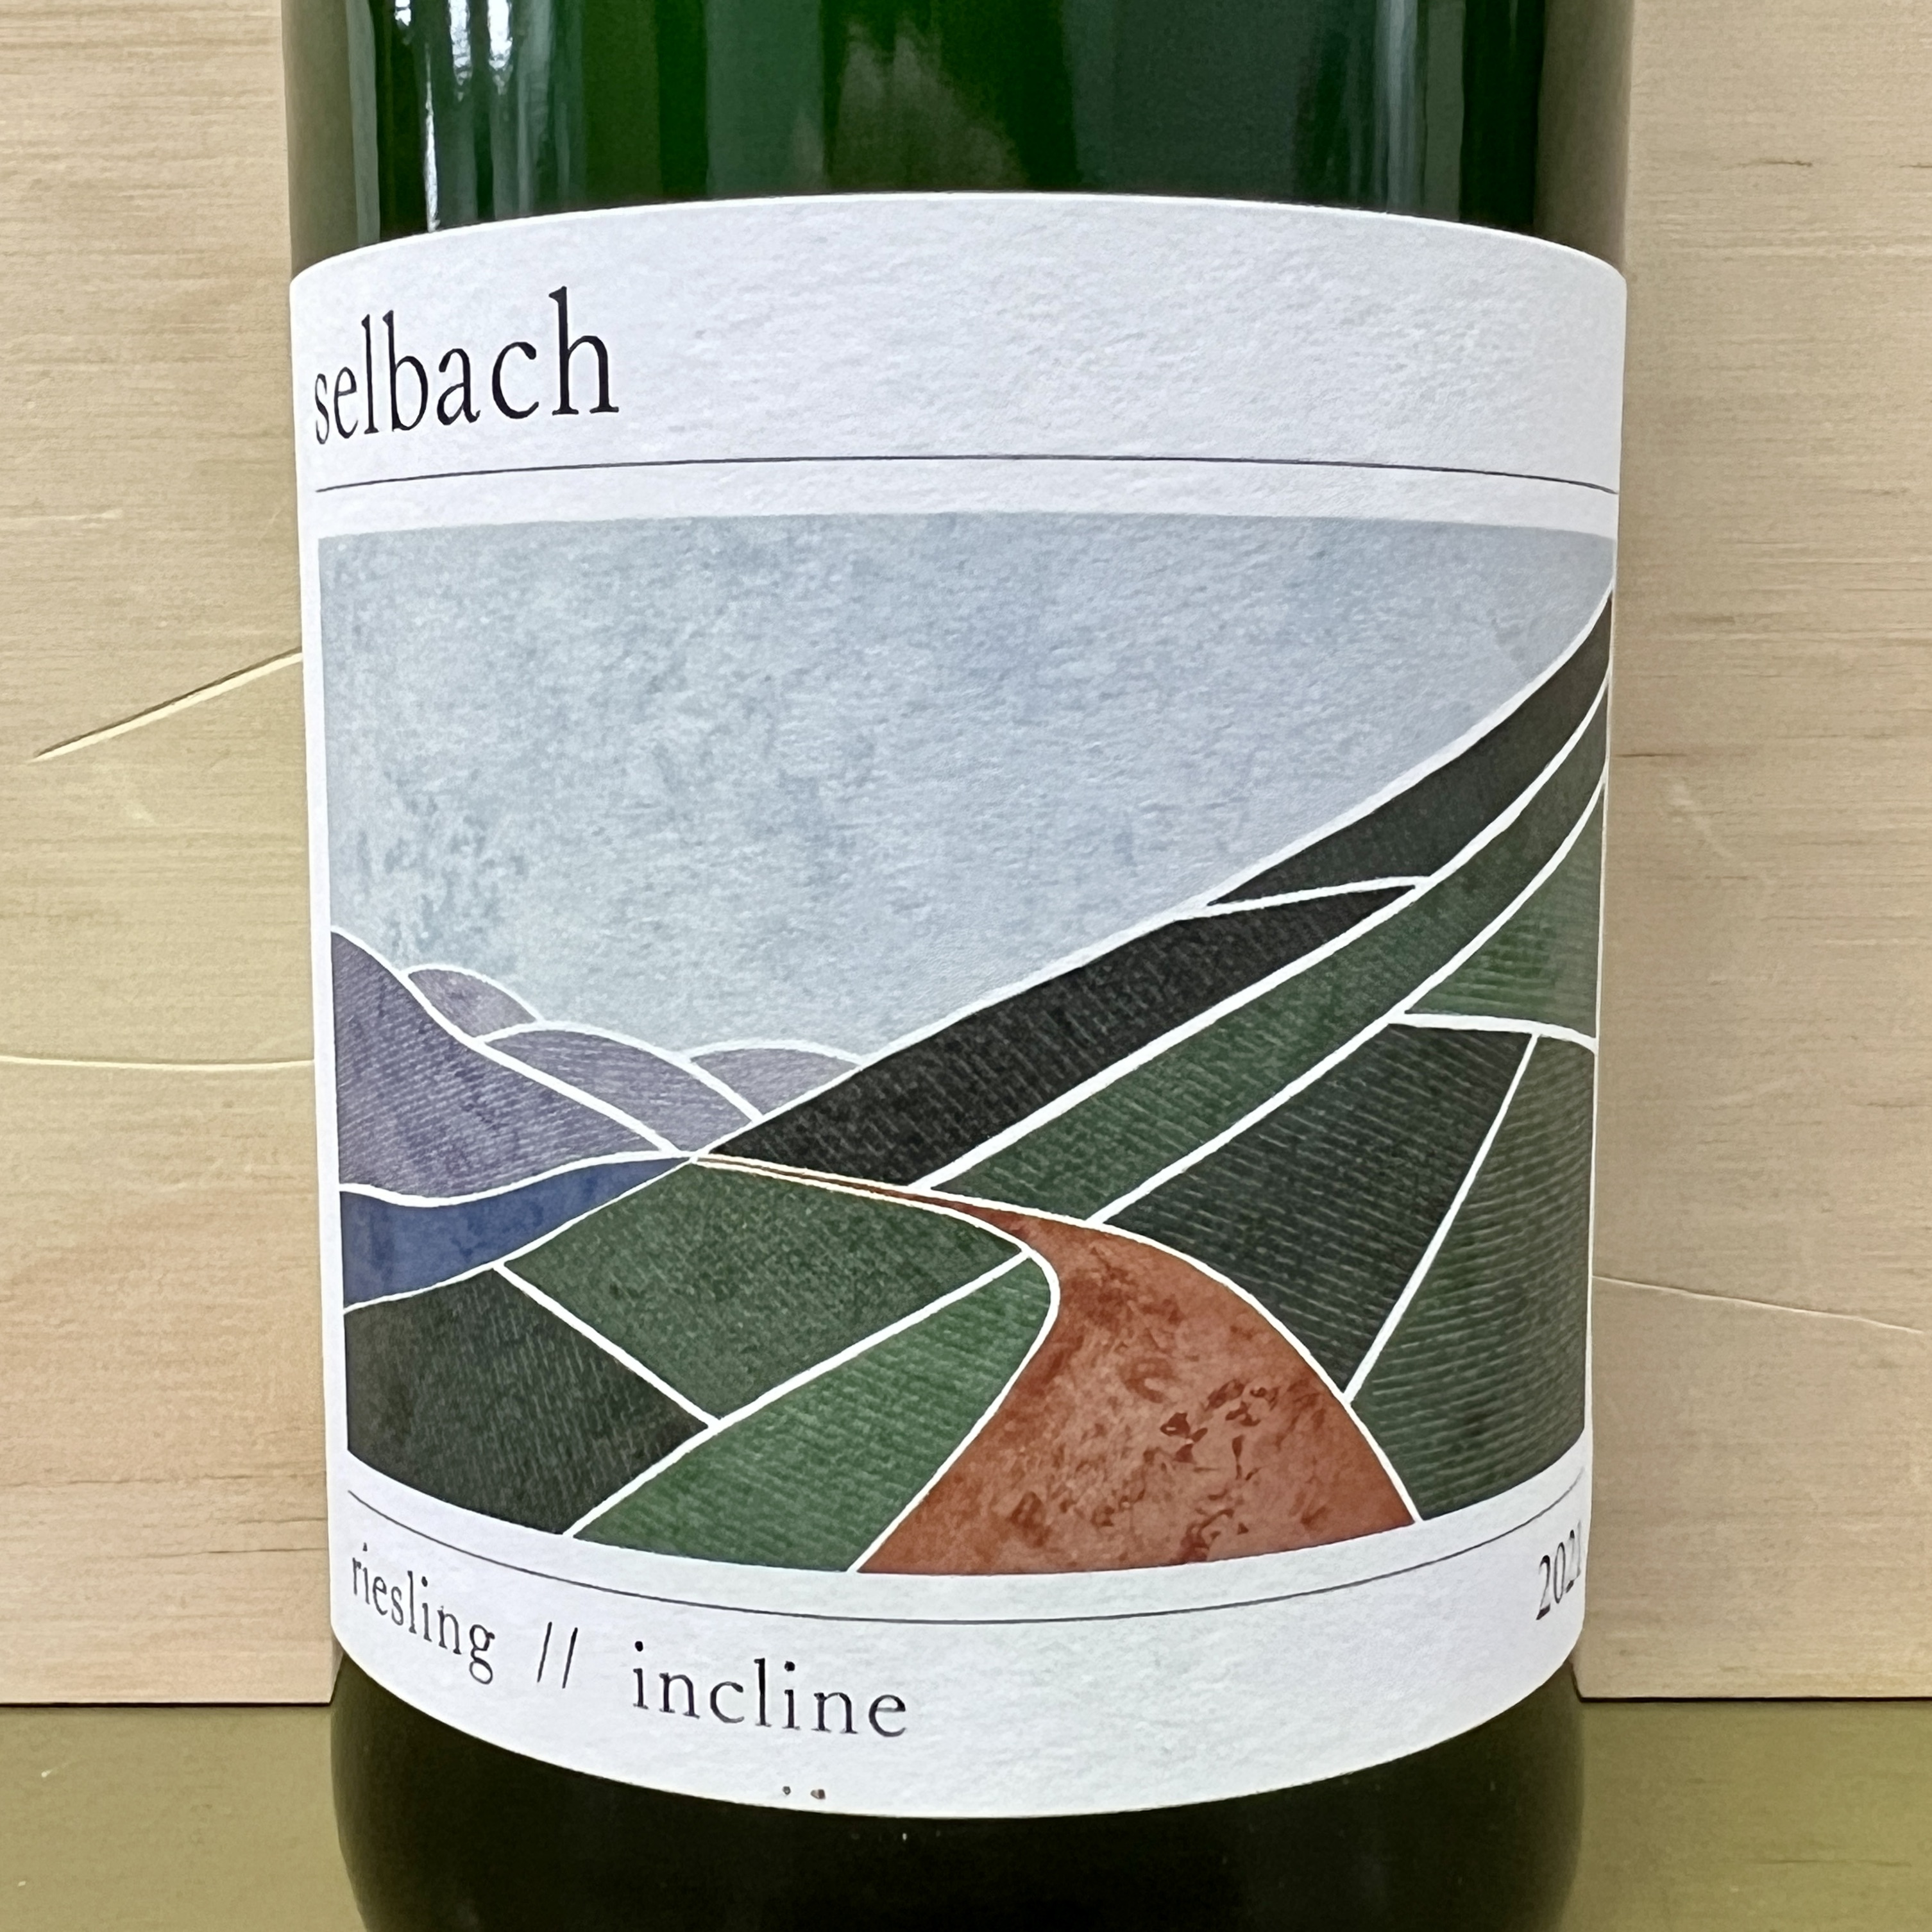 Selbach 'Incline' Riesling Mosel 2021